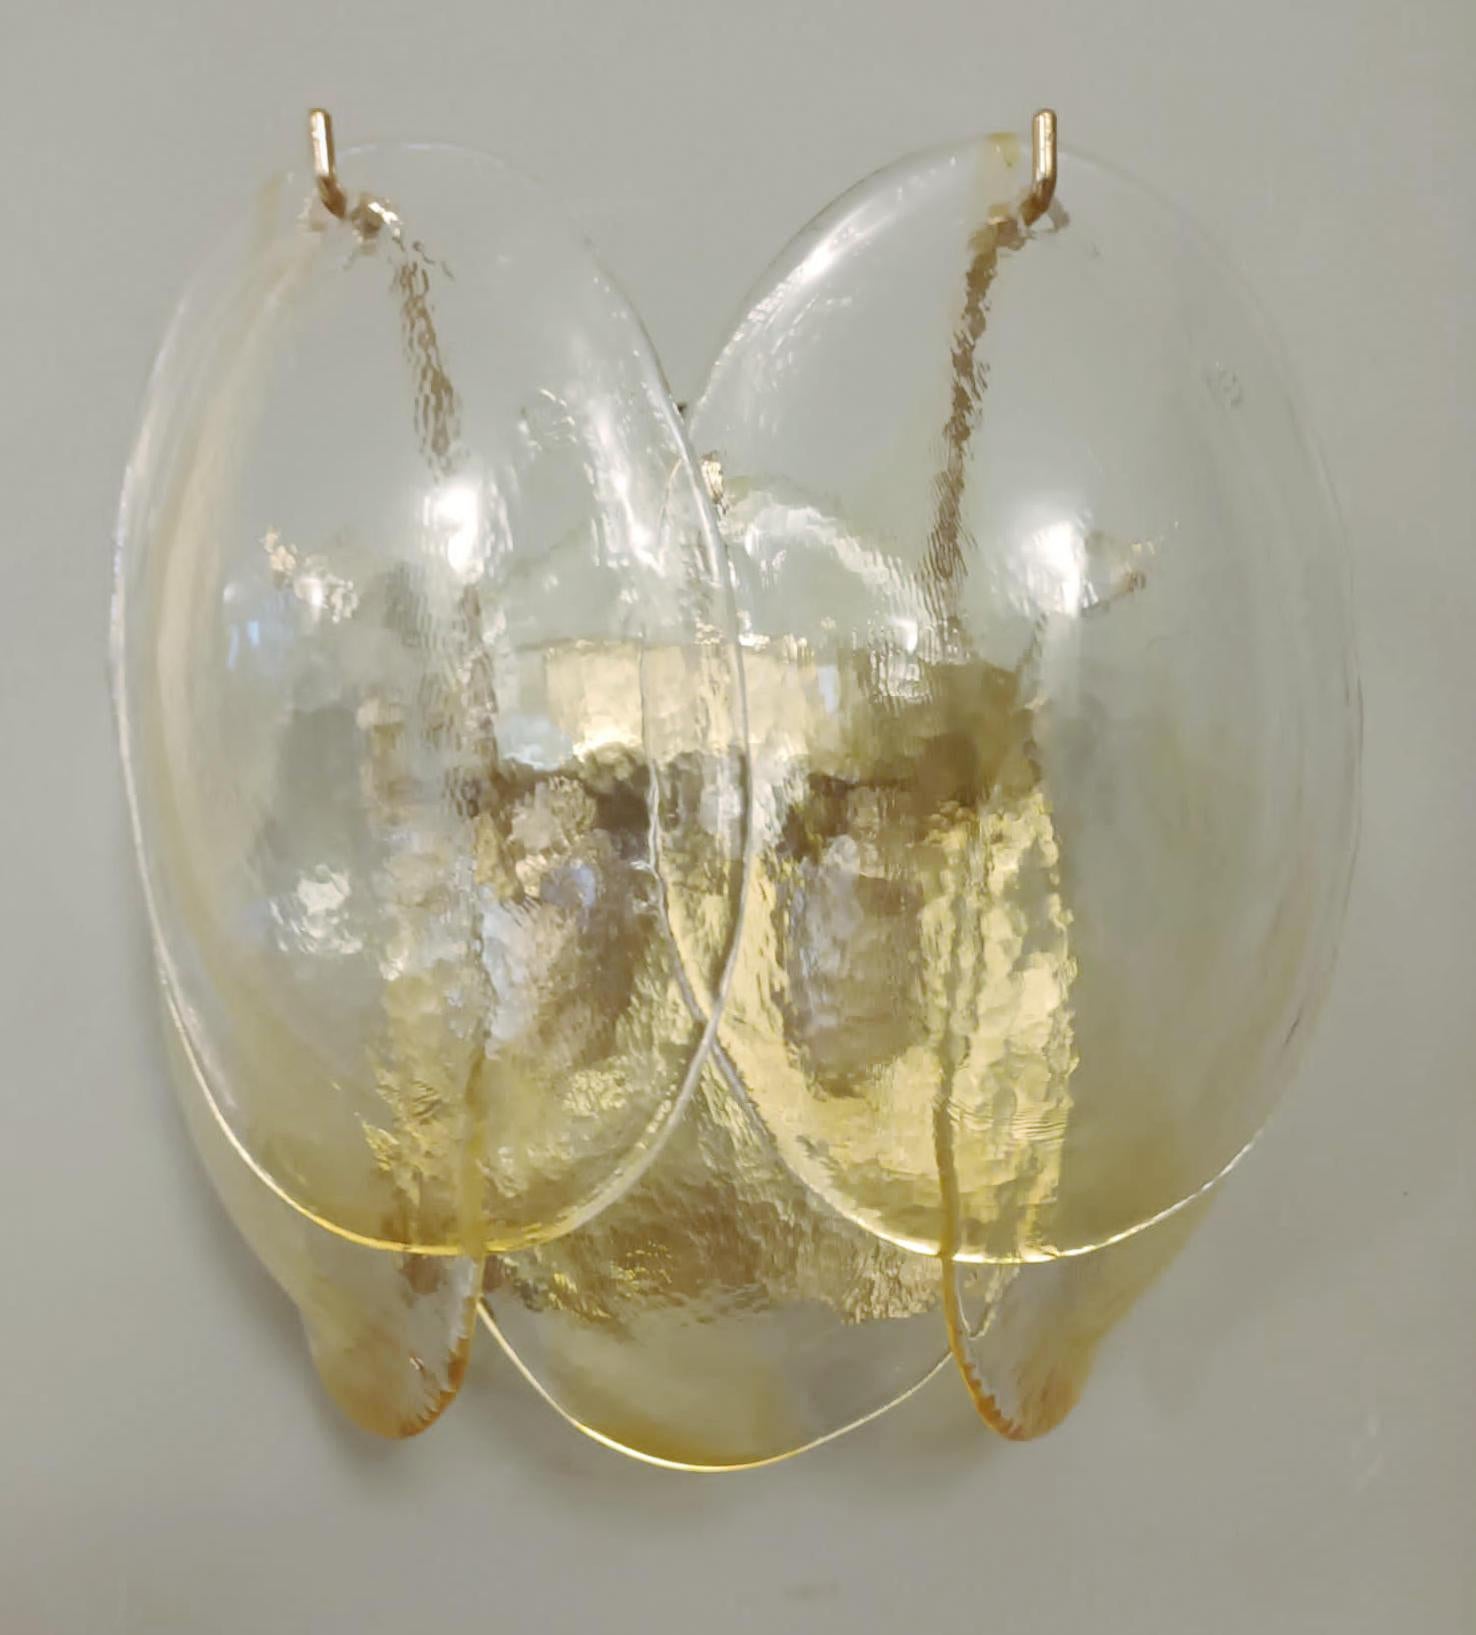 Vintage Italian chandelier with clear and amber glass shells suspended on brass frame / Made in Italy by La Murrina, circa 1980s
Original mark on glasses and frame 
Measures: height 9 inches, width 9 inches, depth 7 inches
2 lights / E12 or E14